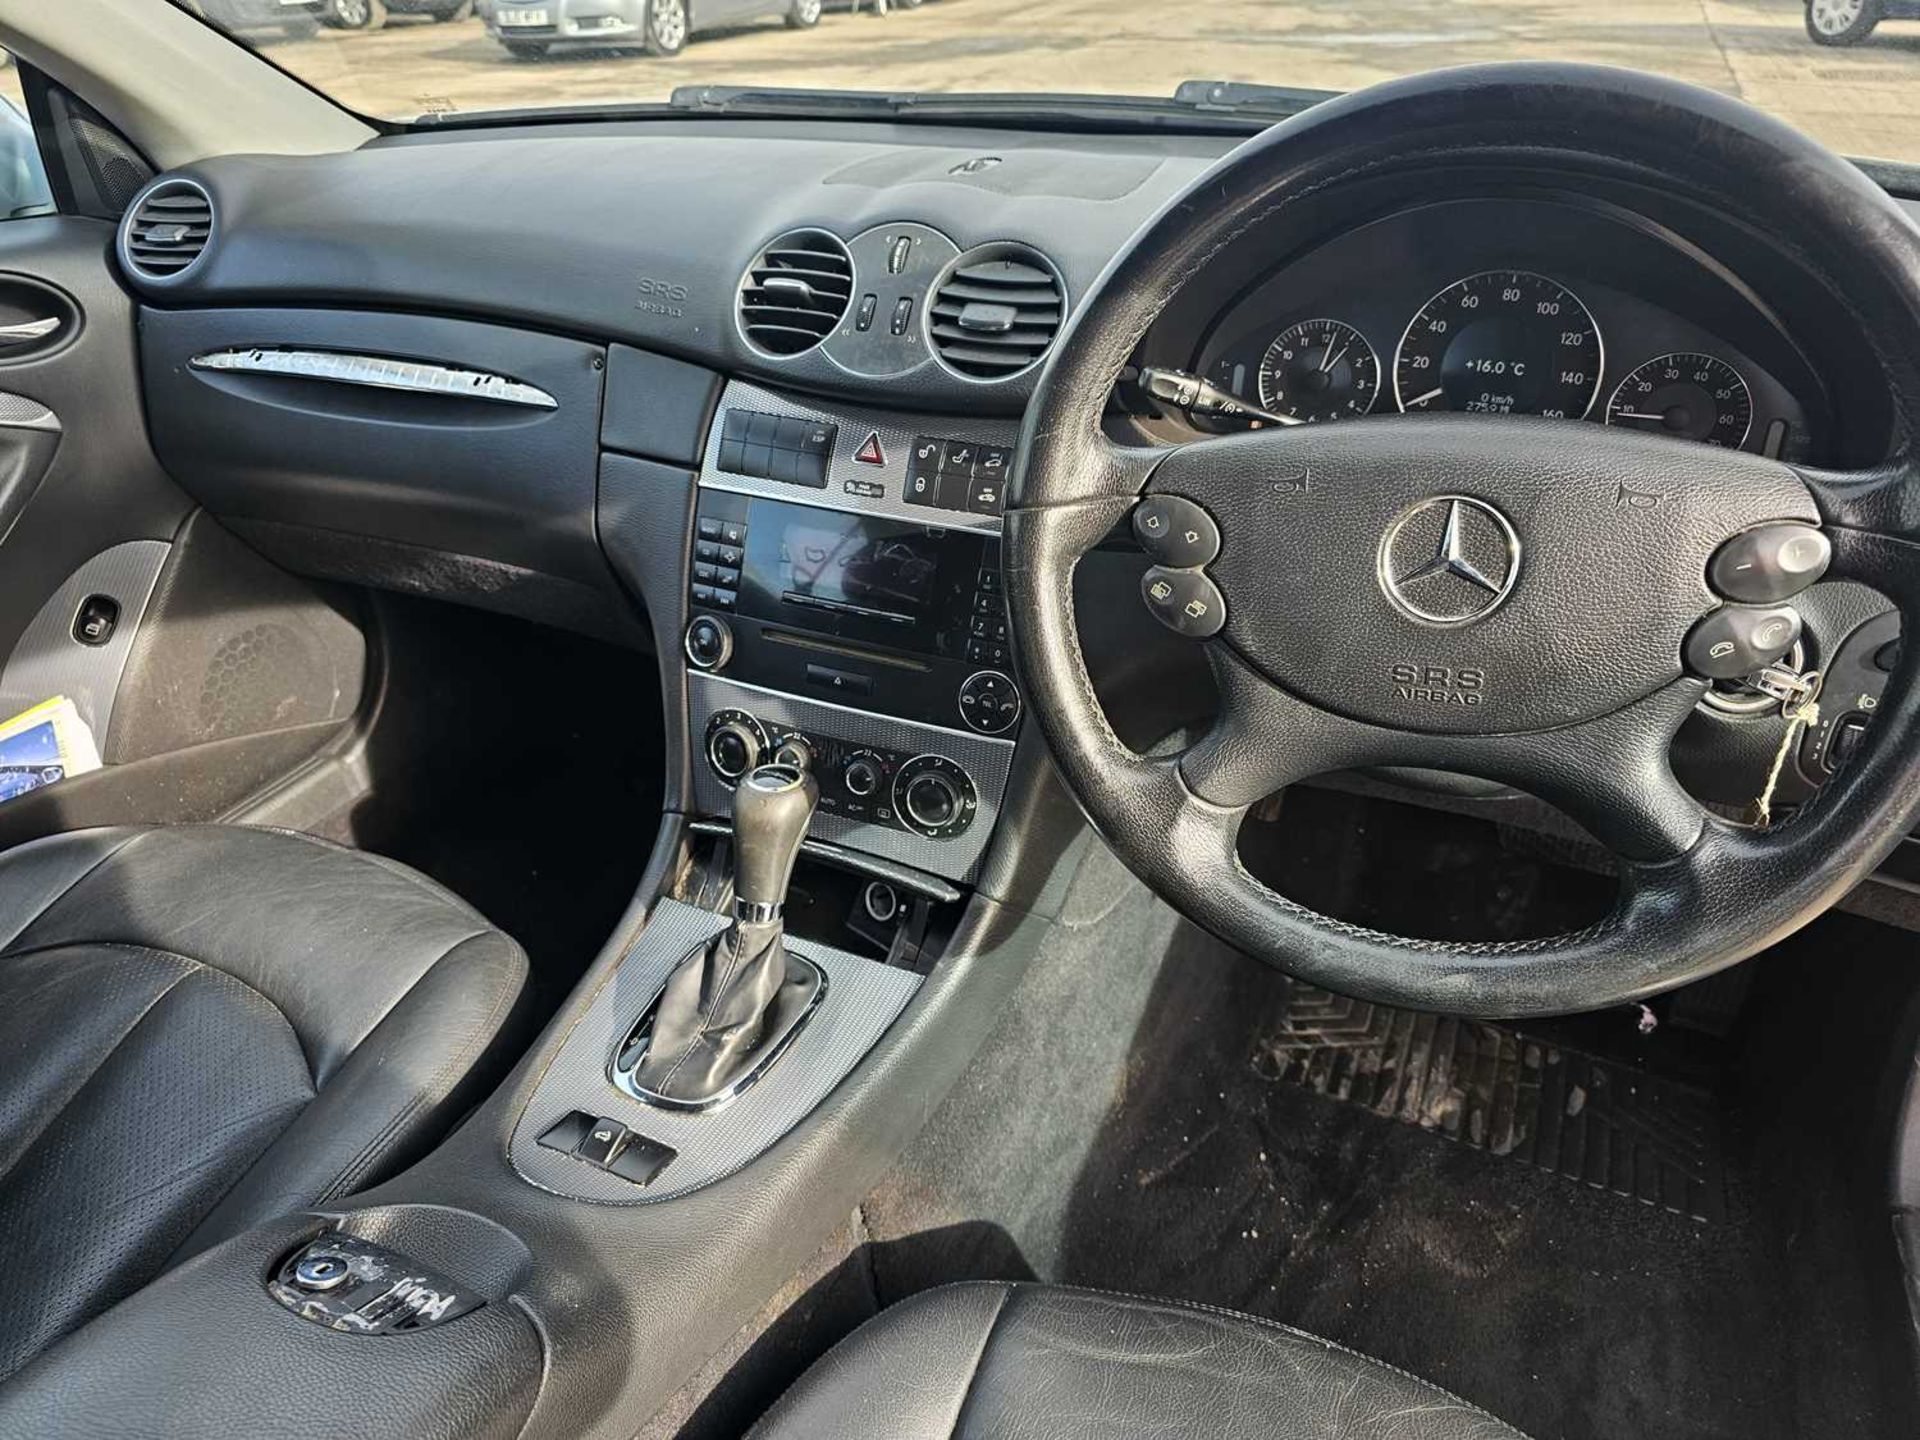 2005 Mercedes CLK200 Kompressor, Convertible, Auto, Full Leather, Bluetooth, Cruise Control, Climate - Image 21 of 29